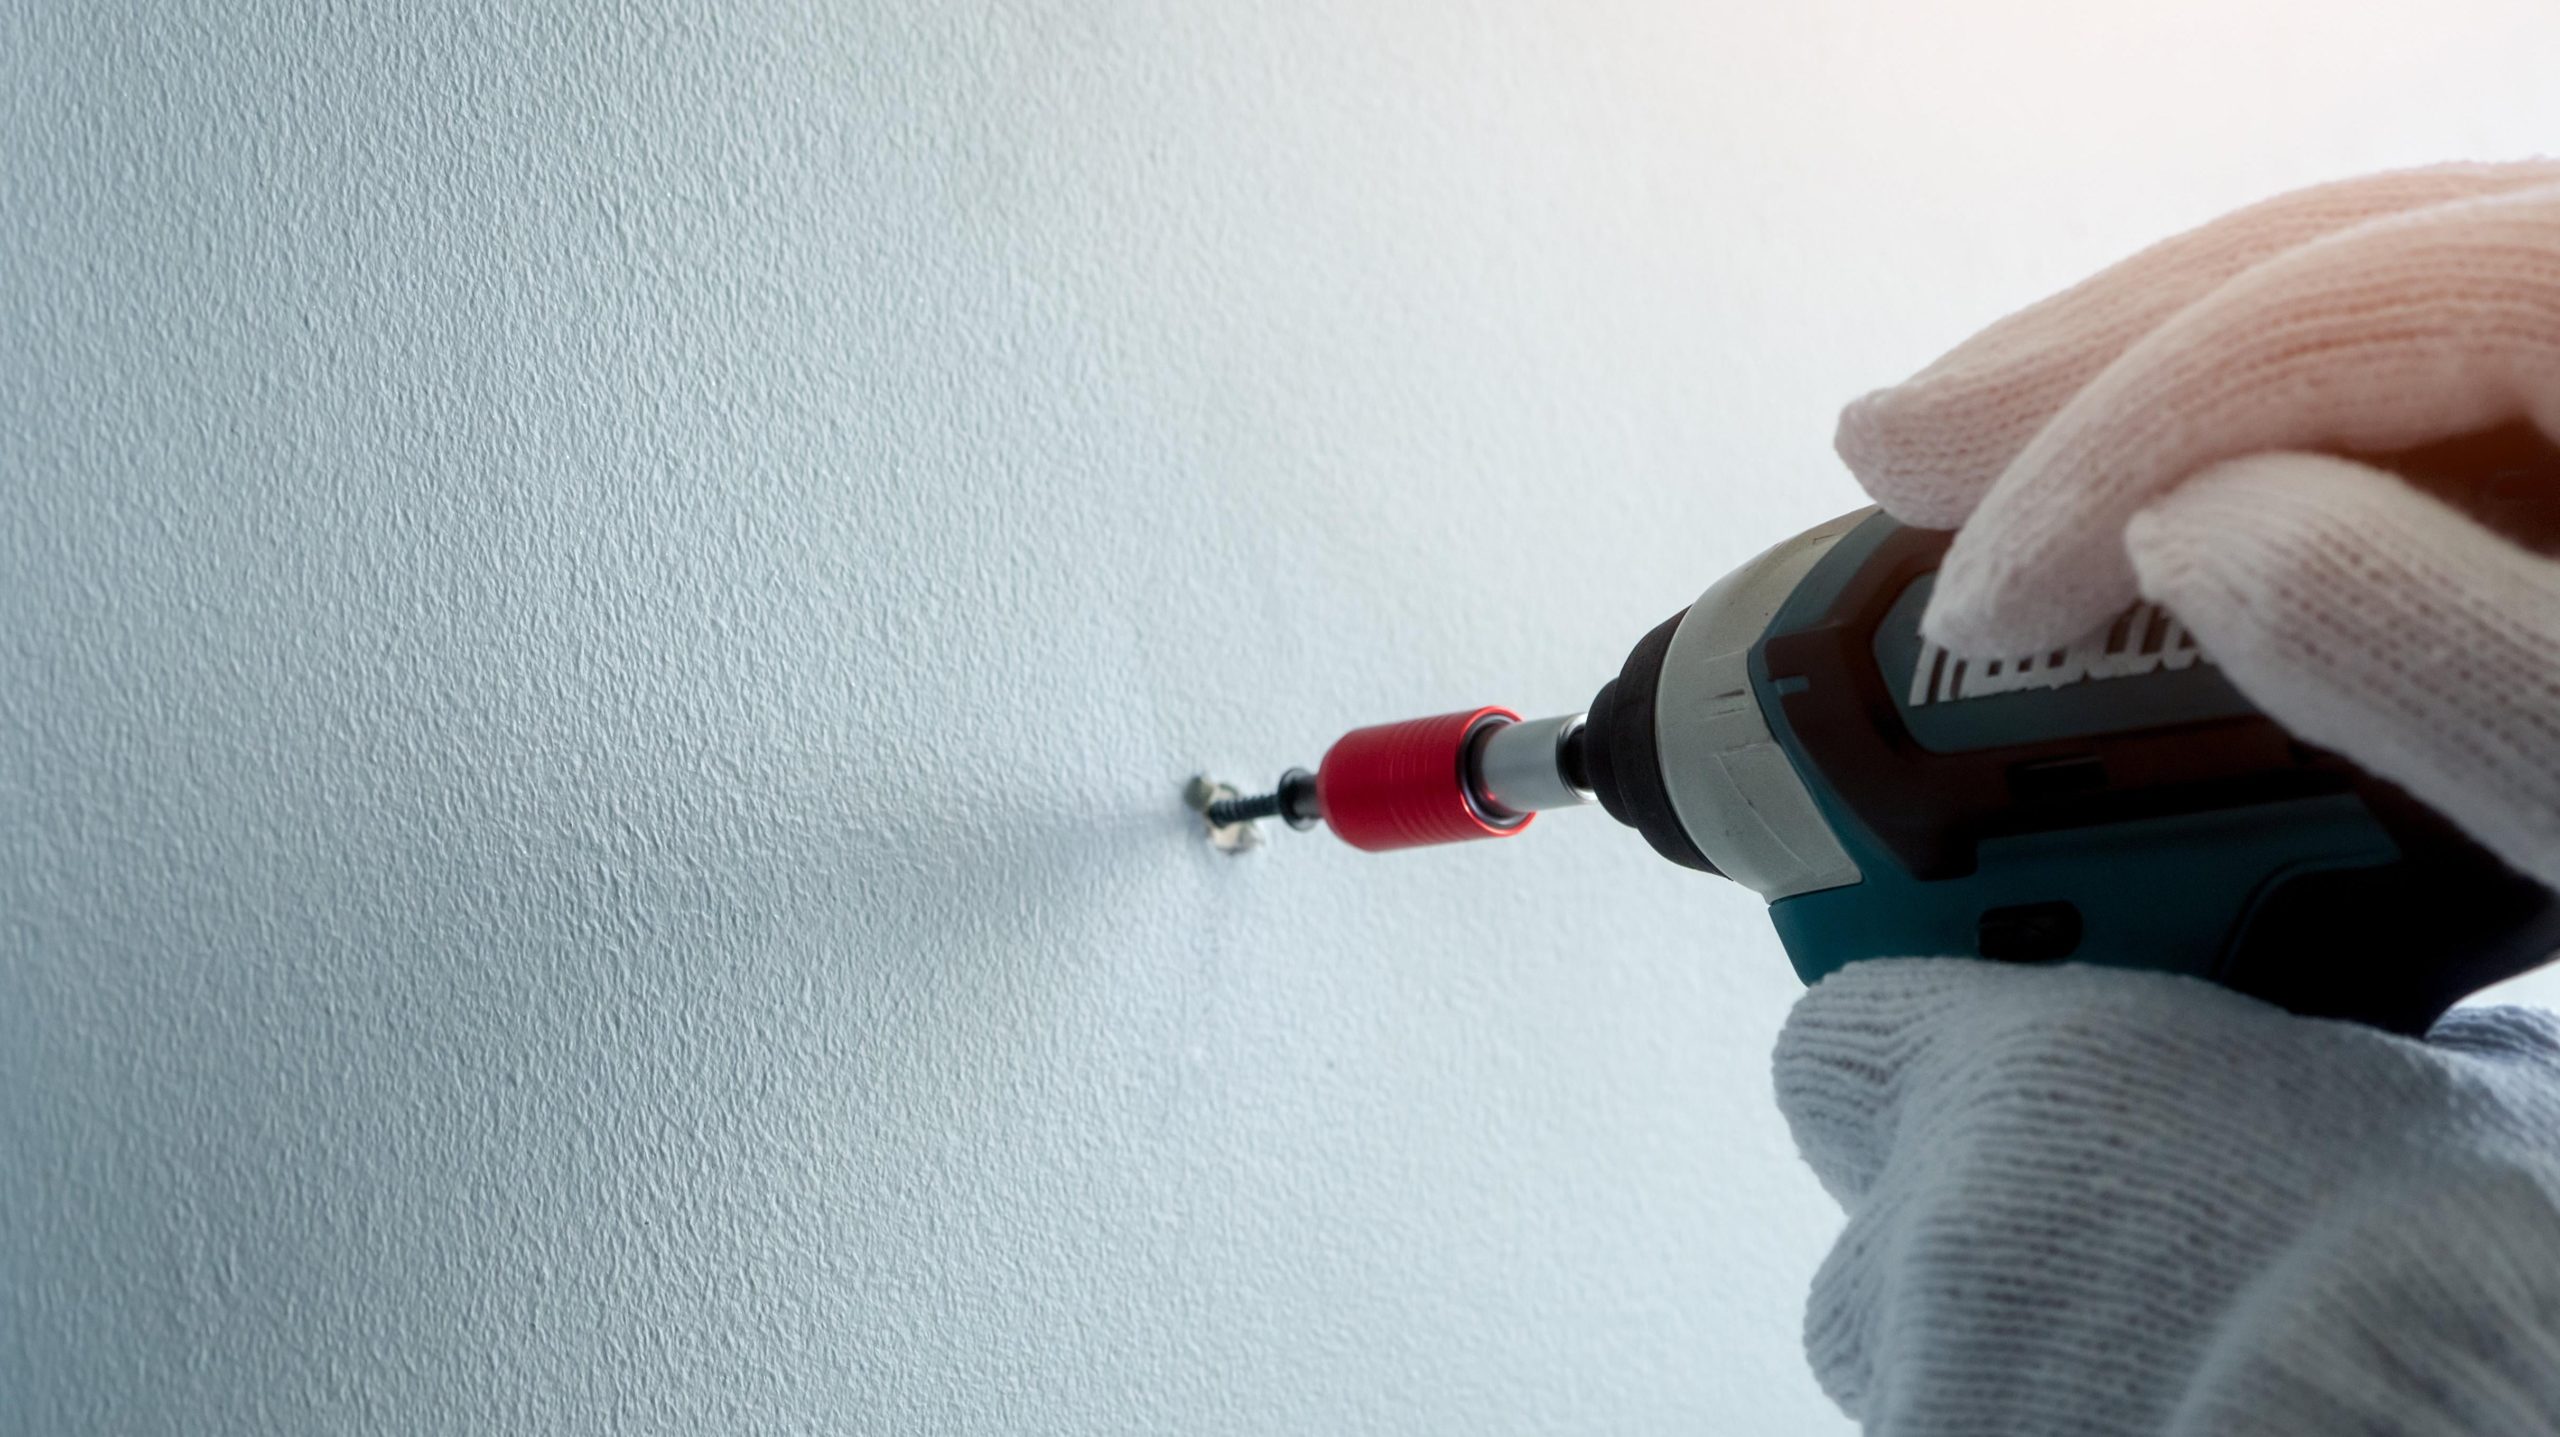 How To Drill Into A Wall How to Screw Into Plaster Walls Without Crumbling Them to Pieces